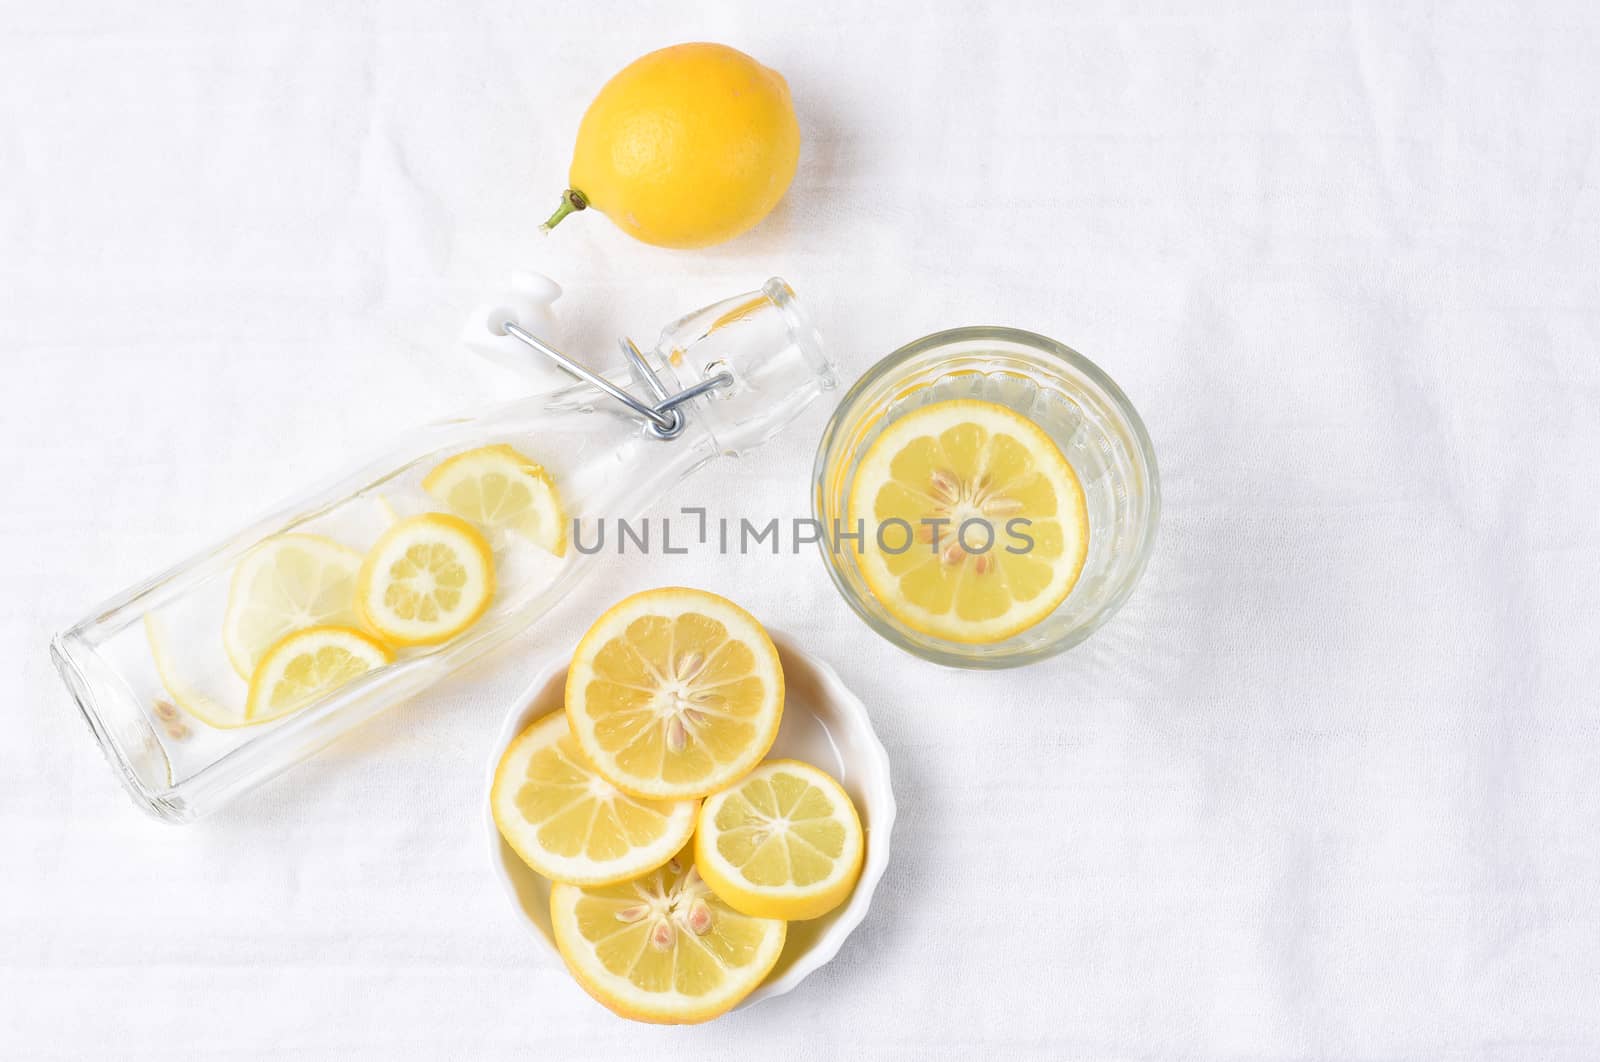 Top view of a glass of lemon water next to a swing bottle and whole piece of fruit. Horizontal format with copy space.